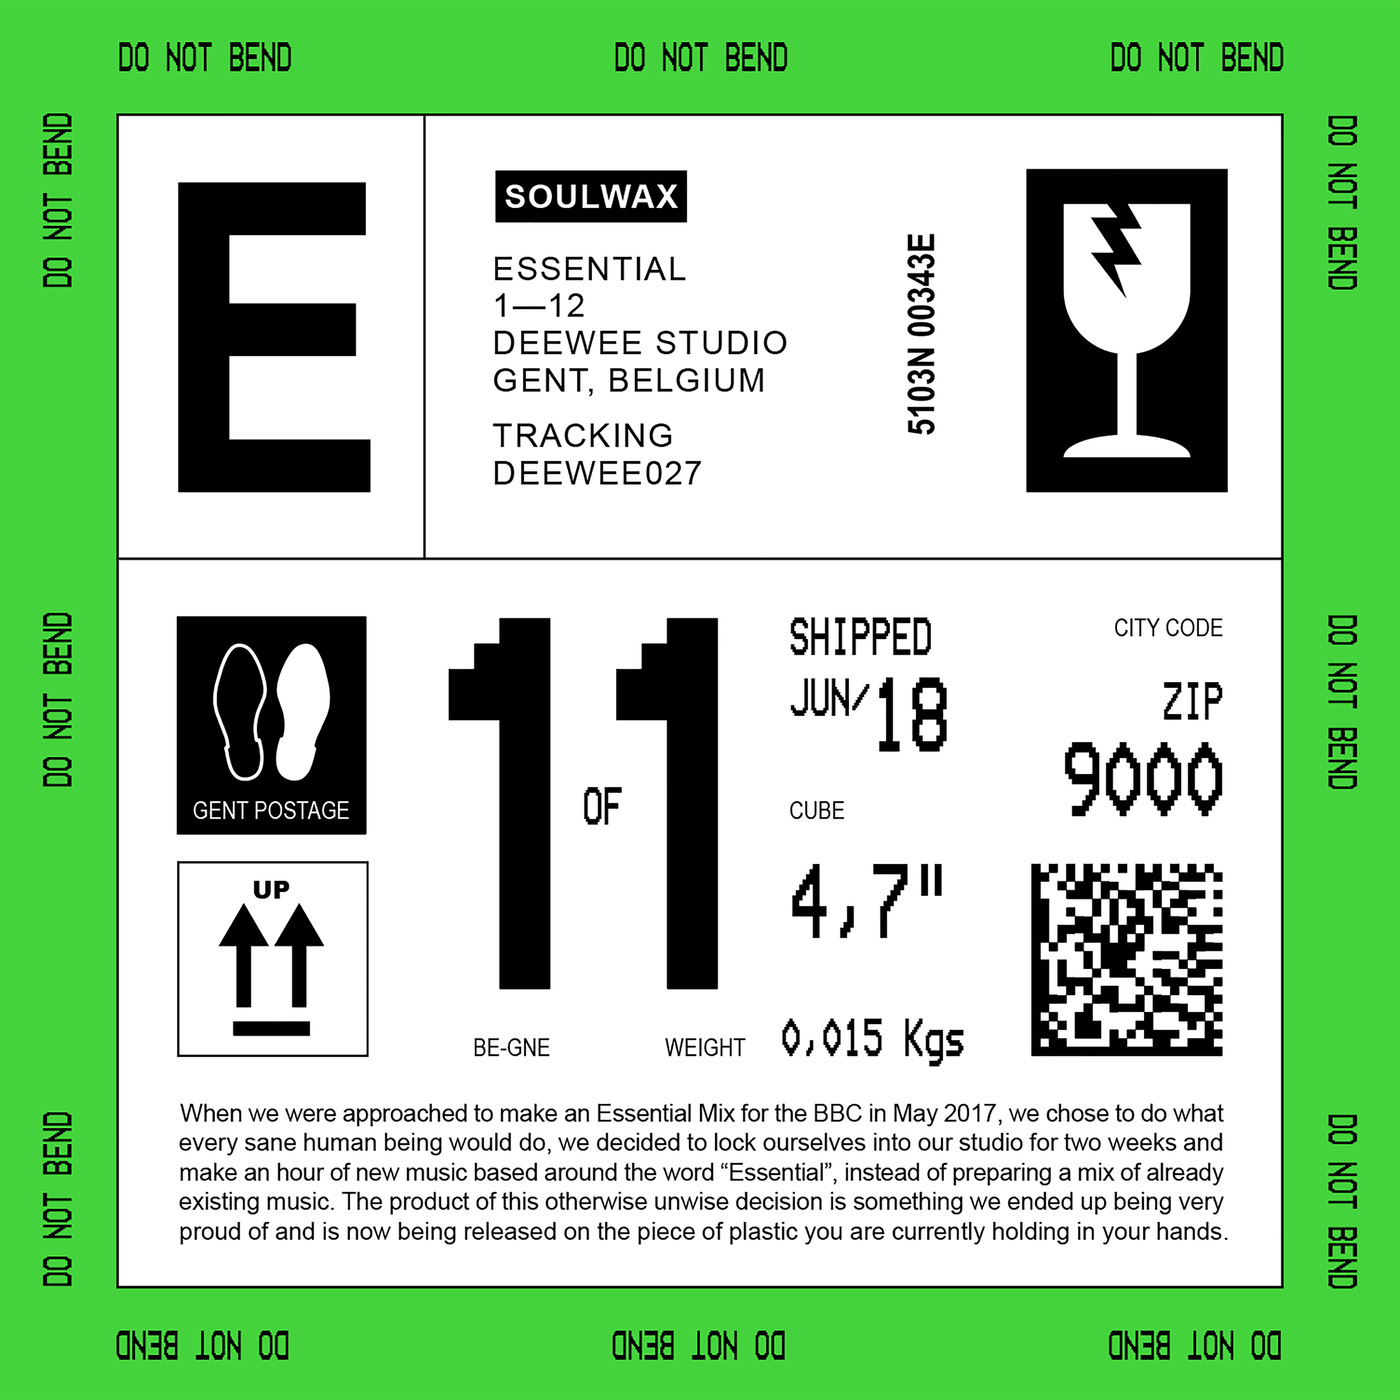 image cover: Soulwax - ESSENTIAL / Deewee